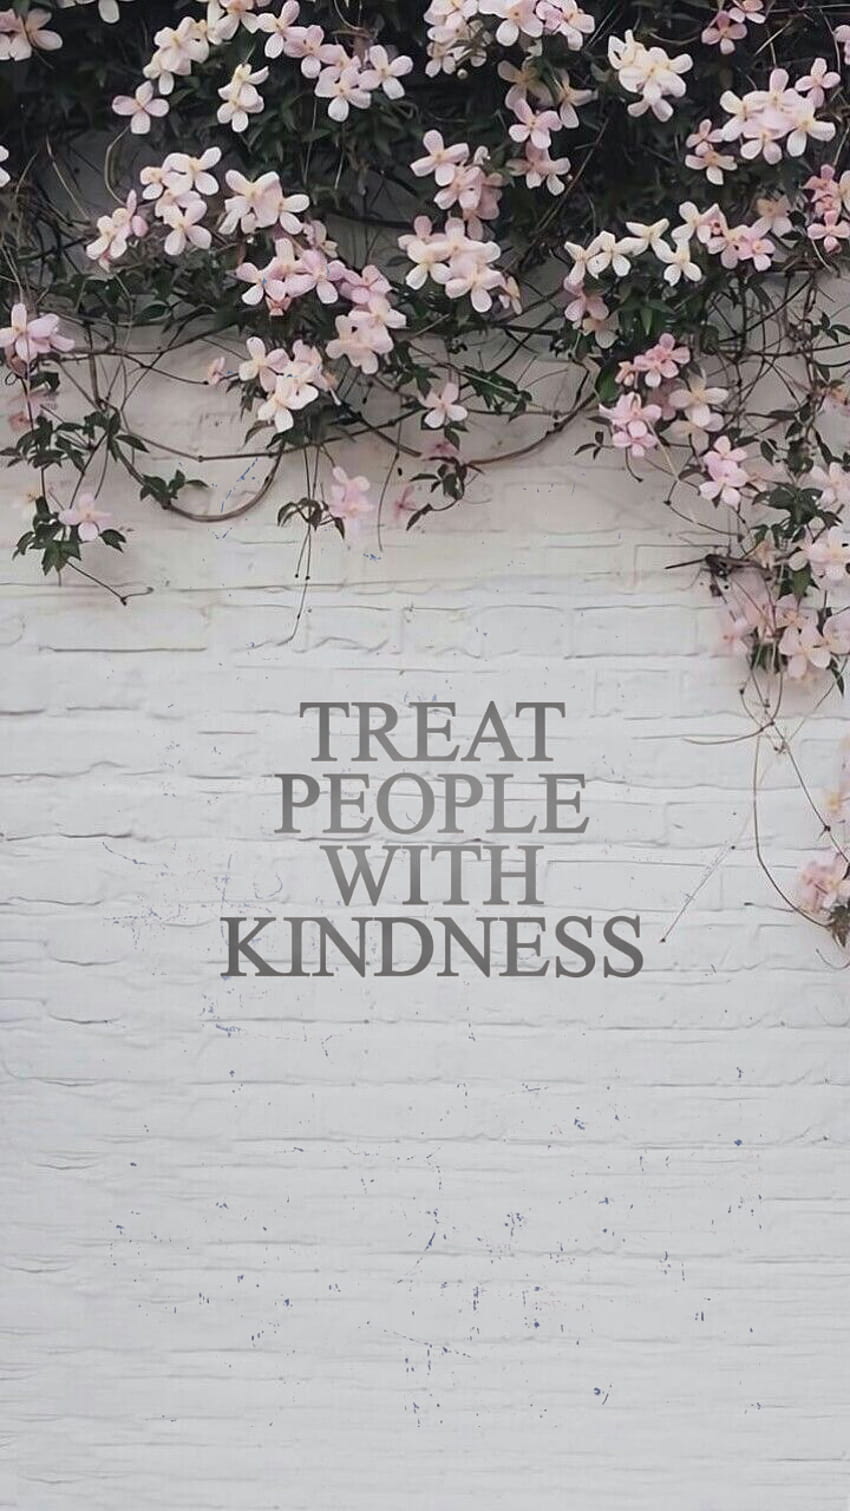 Kindness posted by Ethan Sellers, treat people with kindness HD phone wallpaper